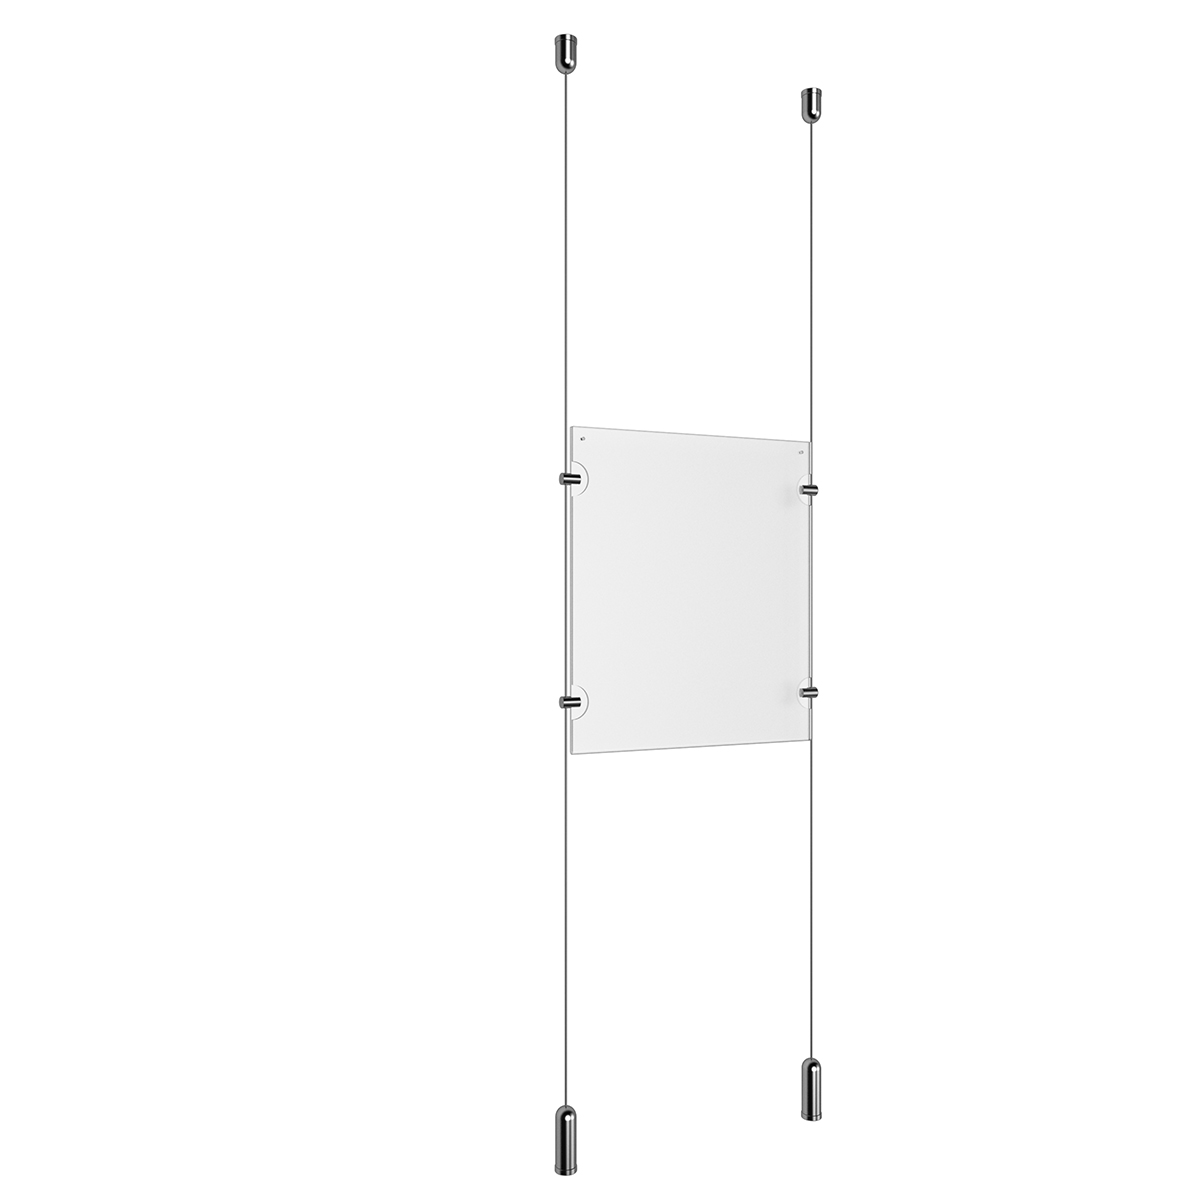 (1) 8-1/2'' Width x 11'' Height Clear Acrylic Frame & (2) Ceiling-to-Floor Aluminum Clear Anodized Cable Systems with (4) Single-Sided Panel Grippers